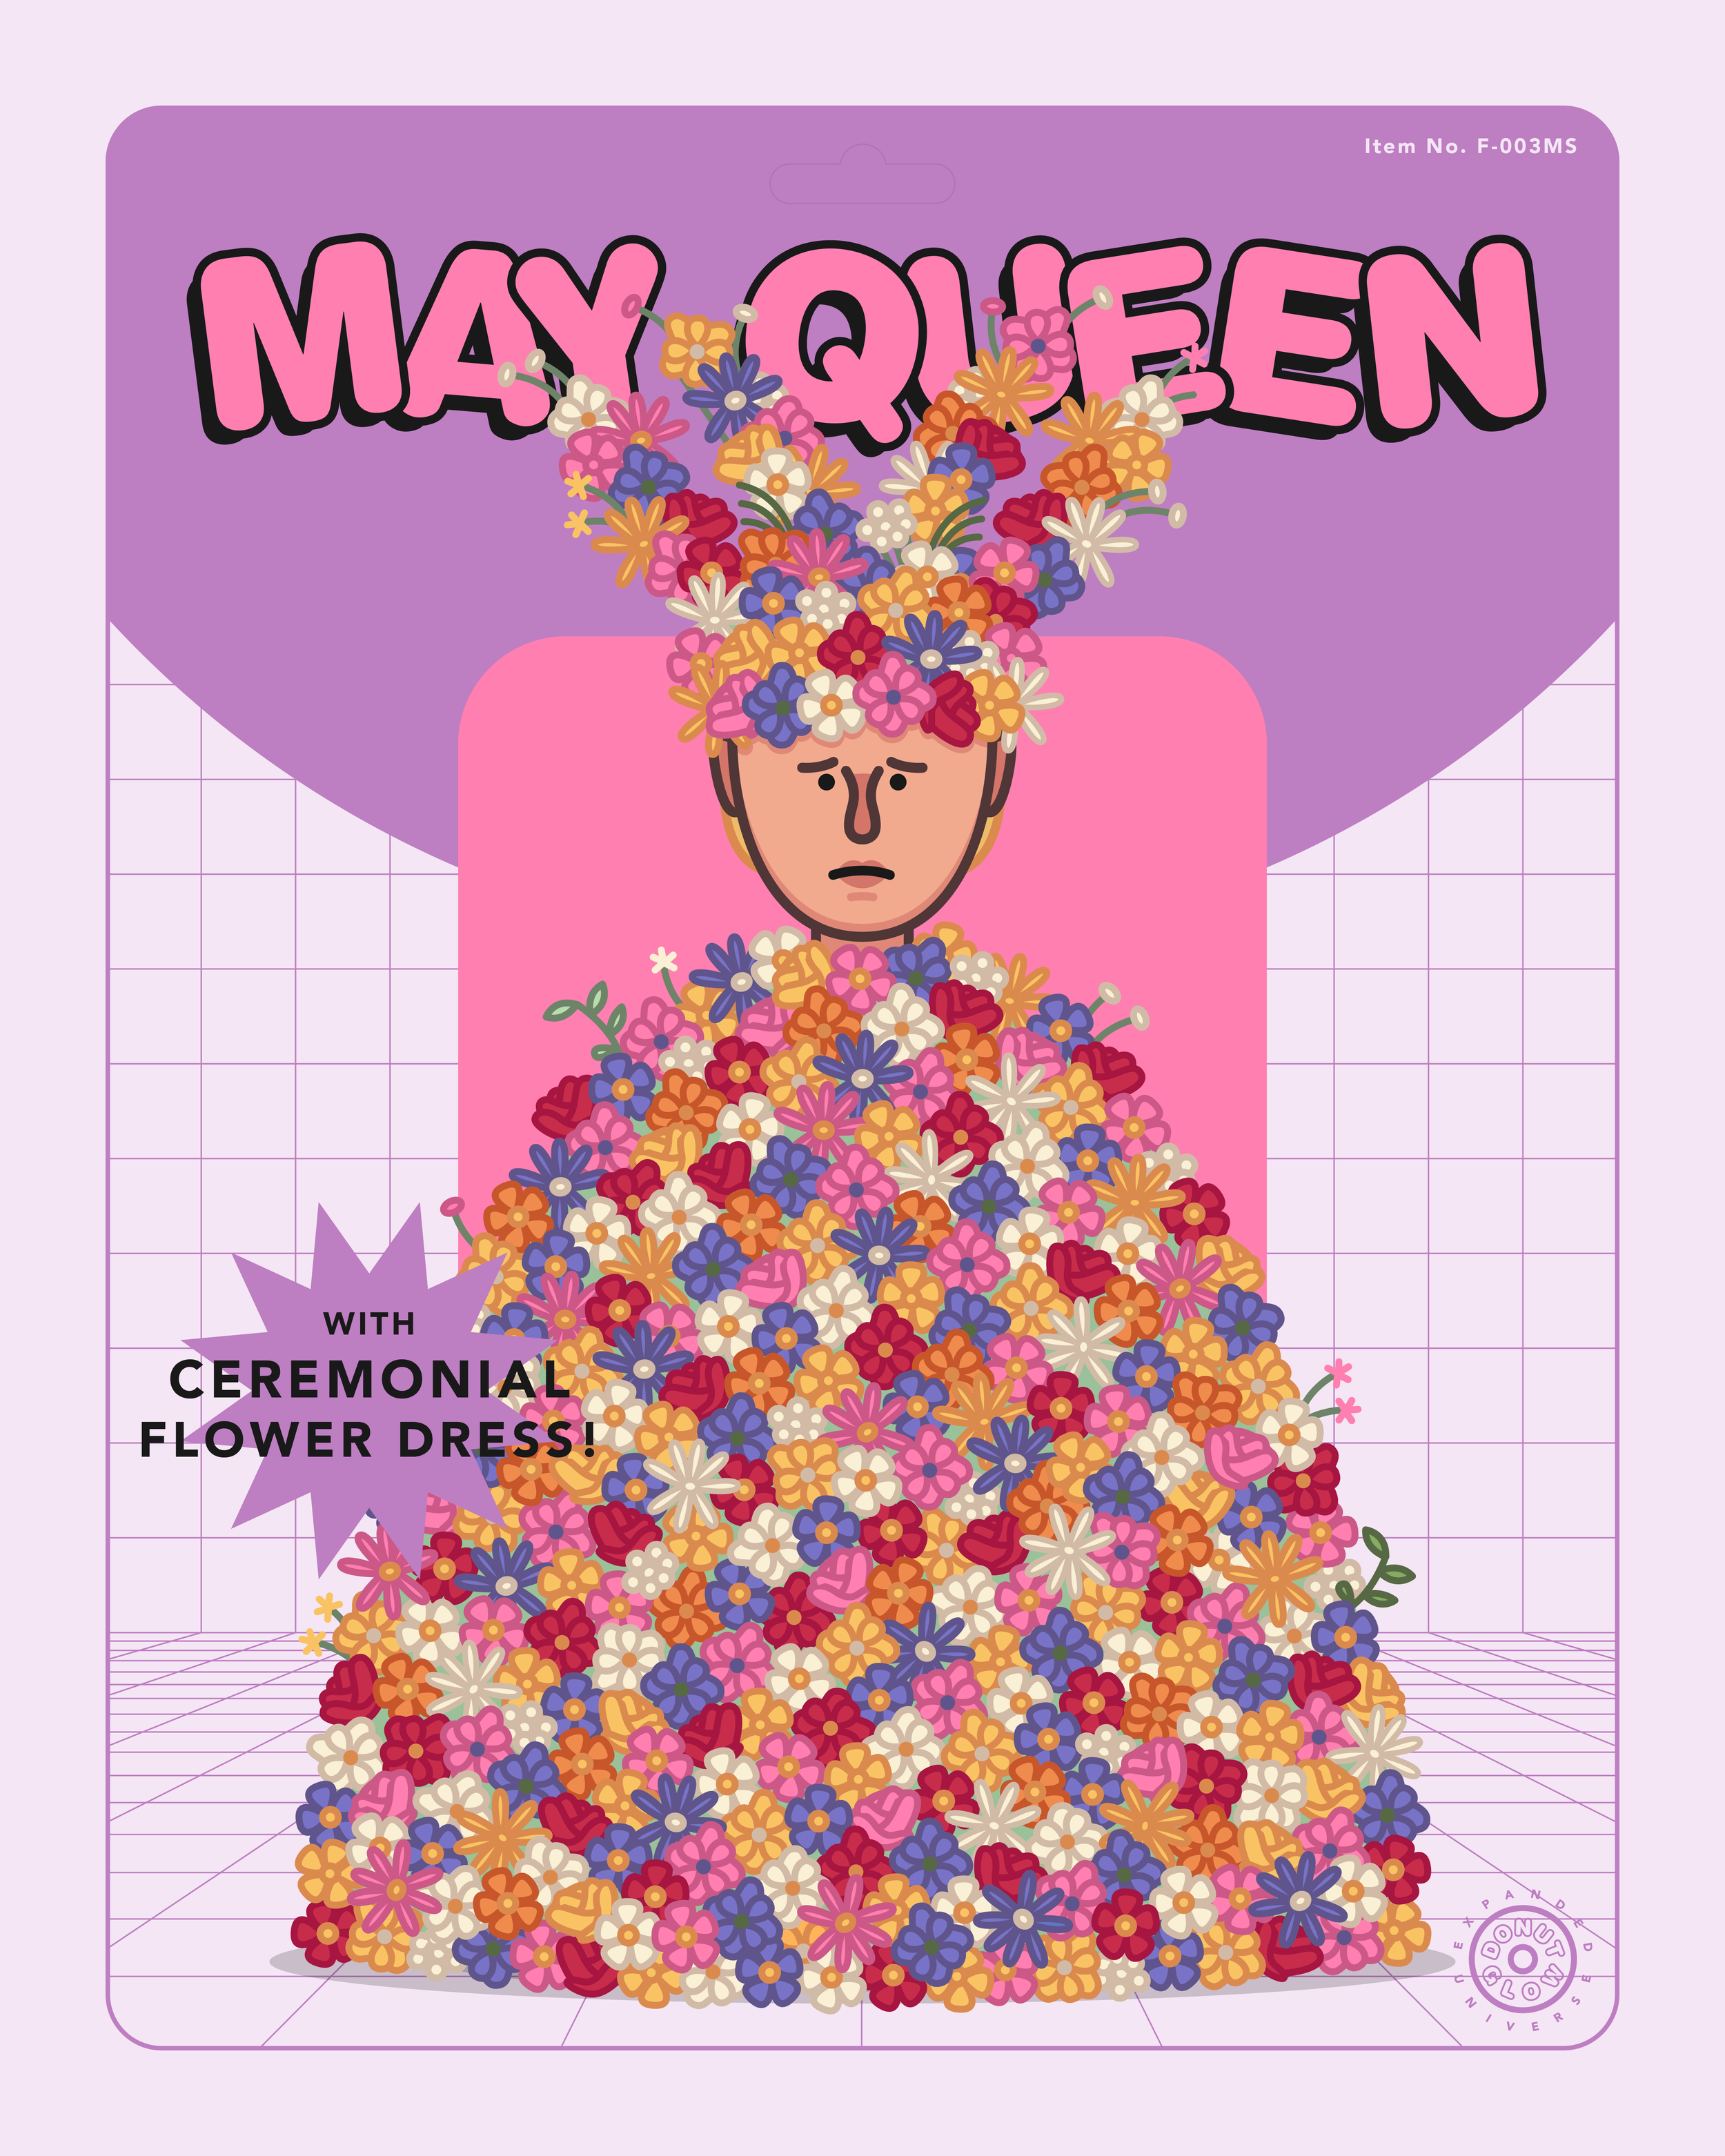 May Queen with Ceremonial Flower Dress